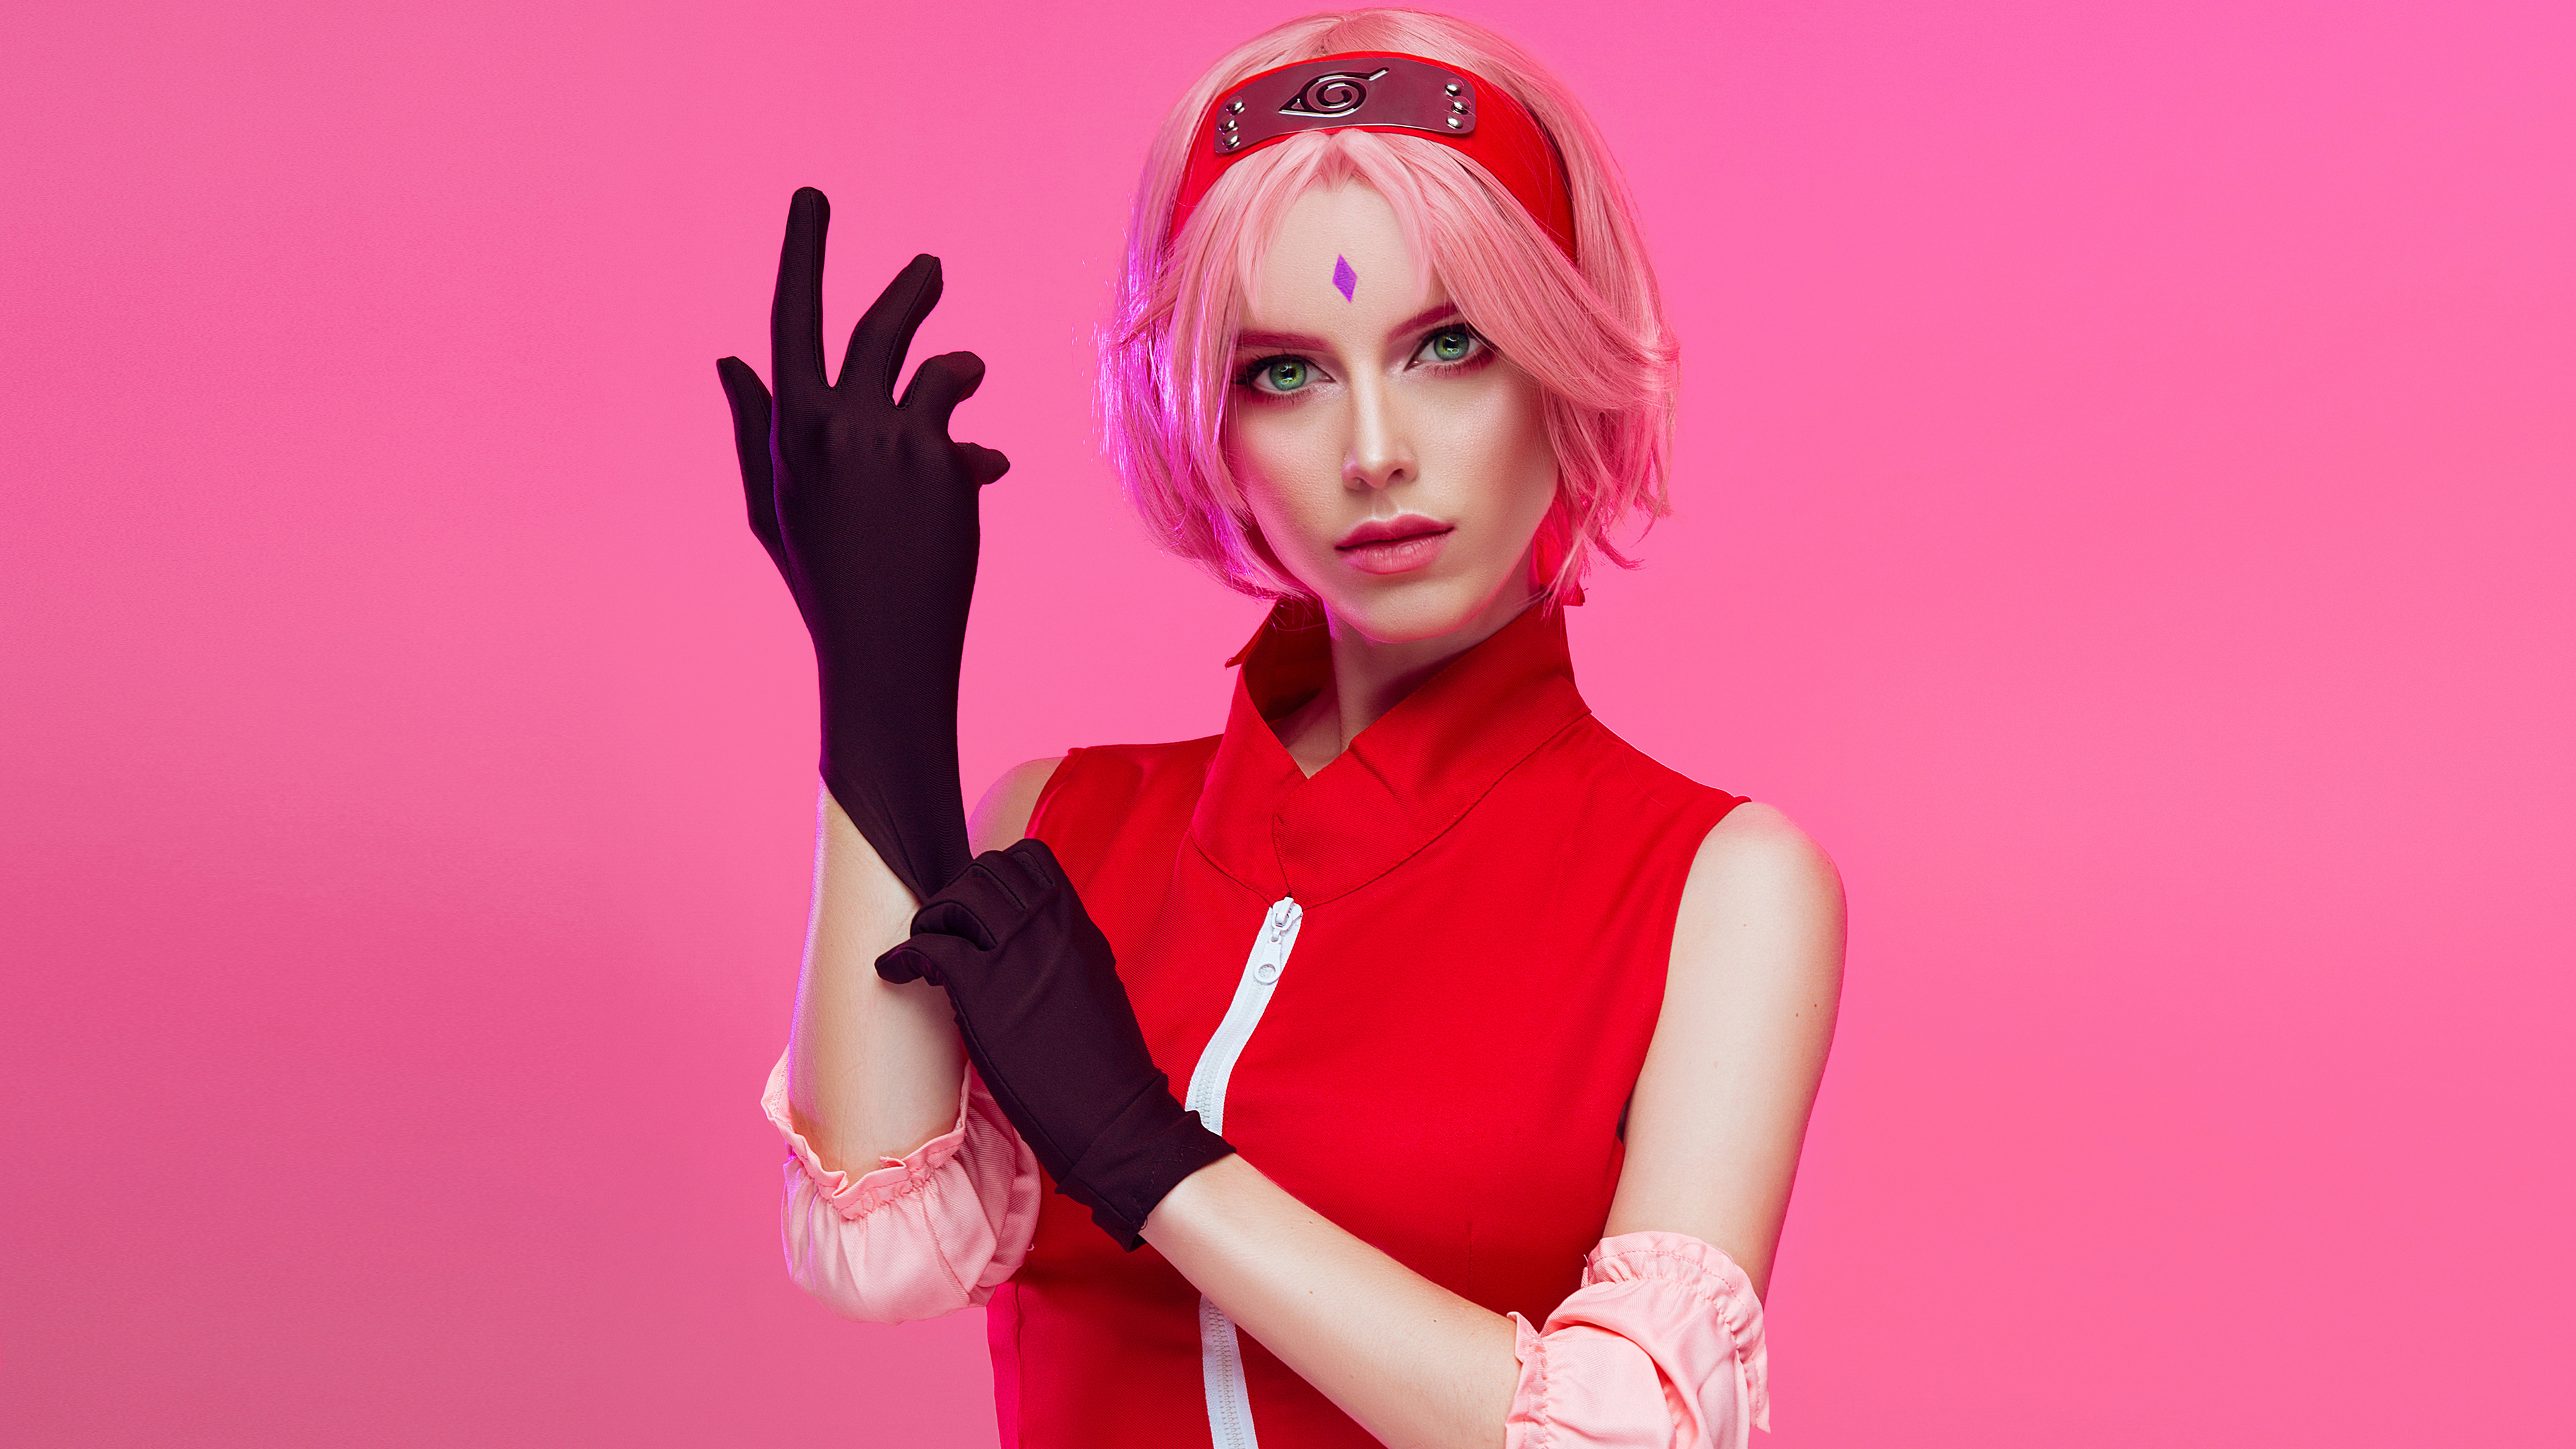 Sakura haruno from naruto cosplay hd anime k wallpapers images backgrounds photos and pictures